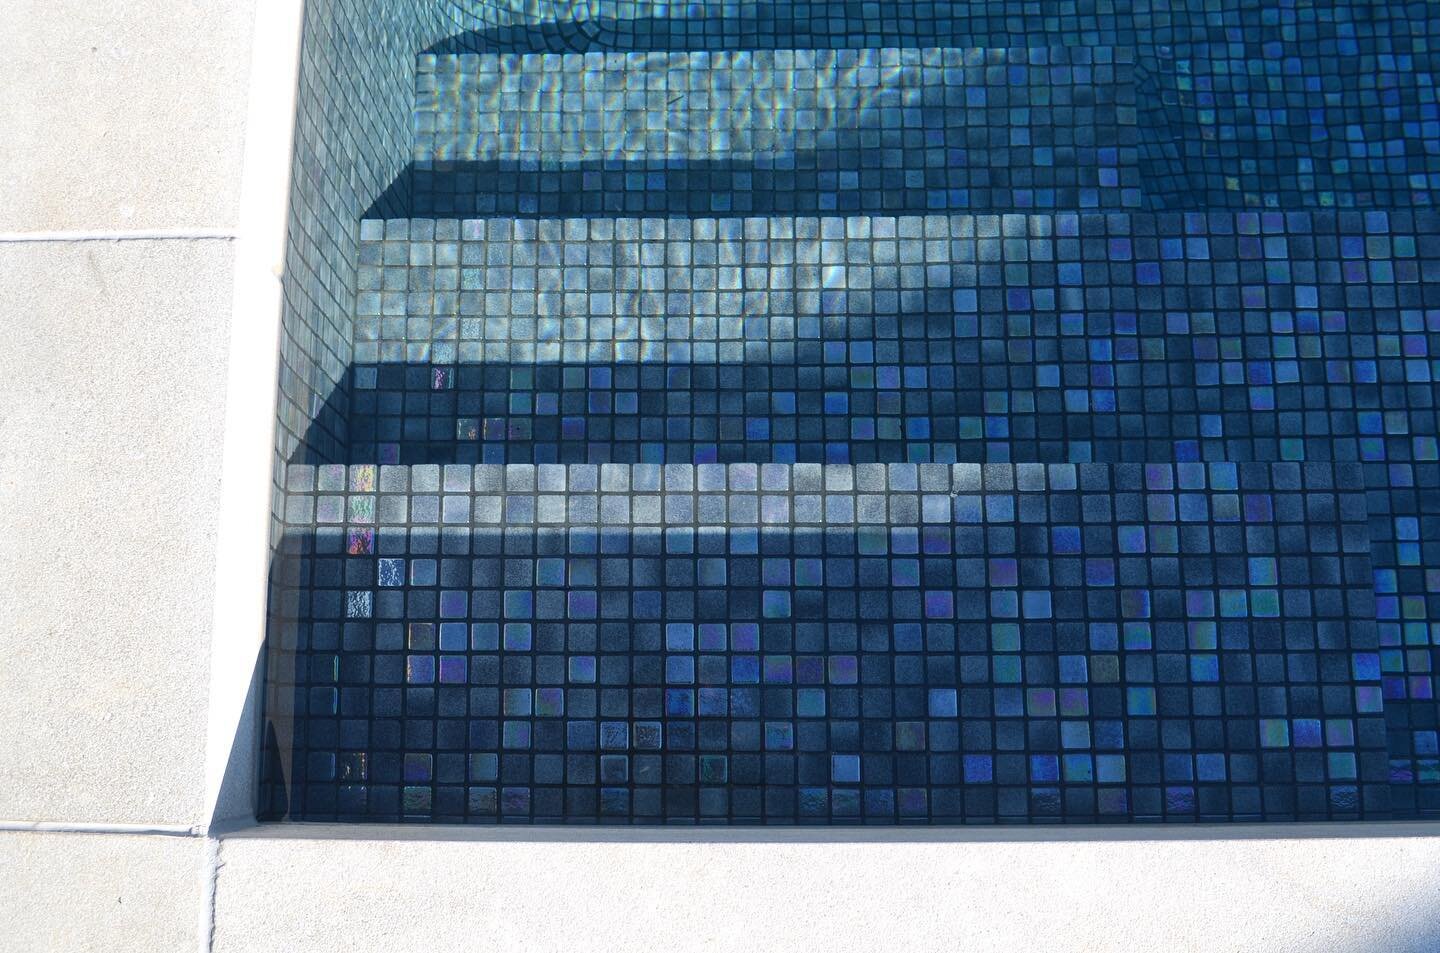 Our pool tiles from @barefoot_living_manly are looking very bright and fresh over at Curl Curl. Perfect for the upcoming warmer months! #pool #pooldesign #summer #barefootliving #tiles #mosaics